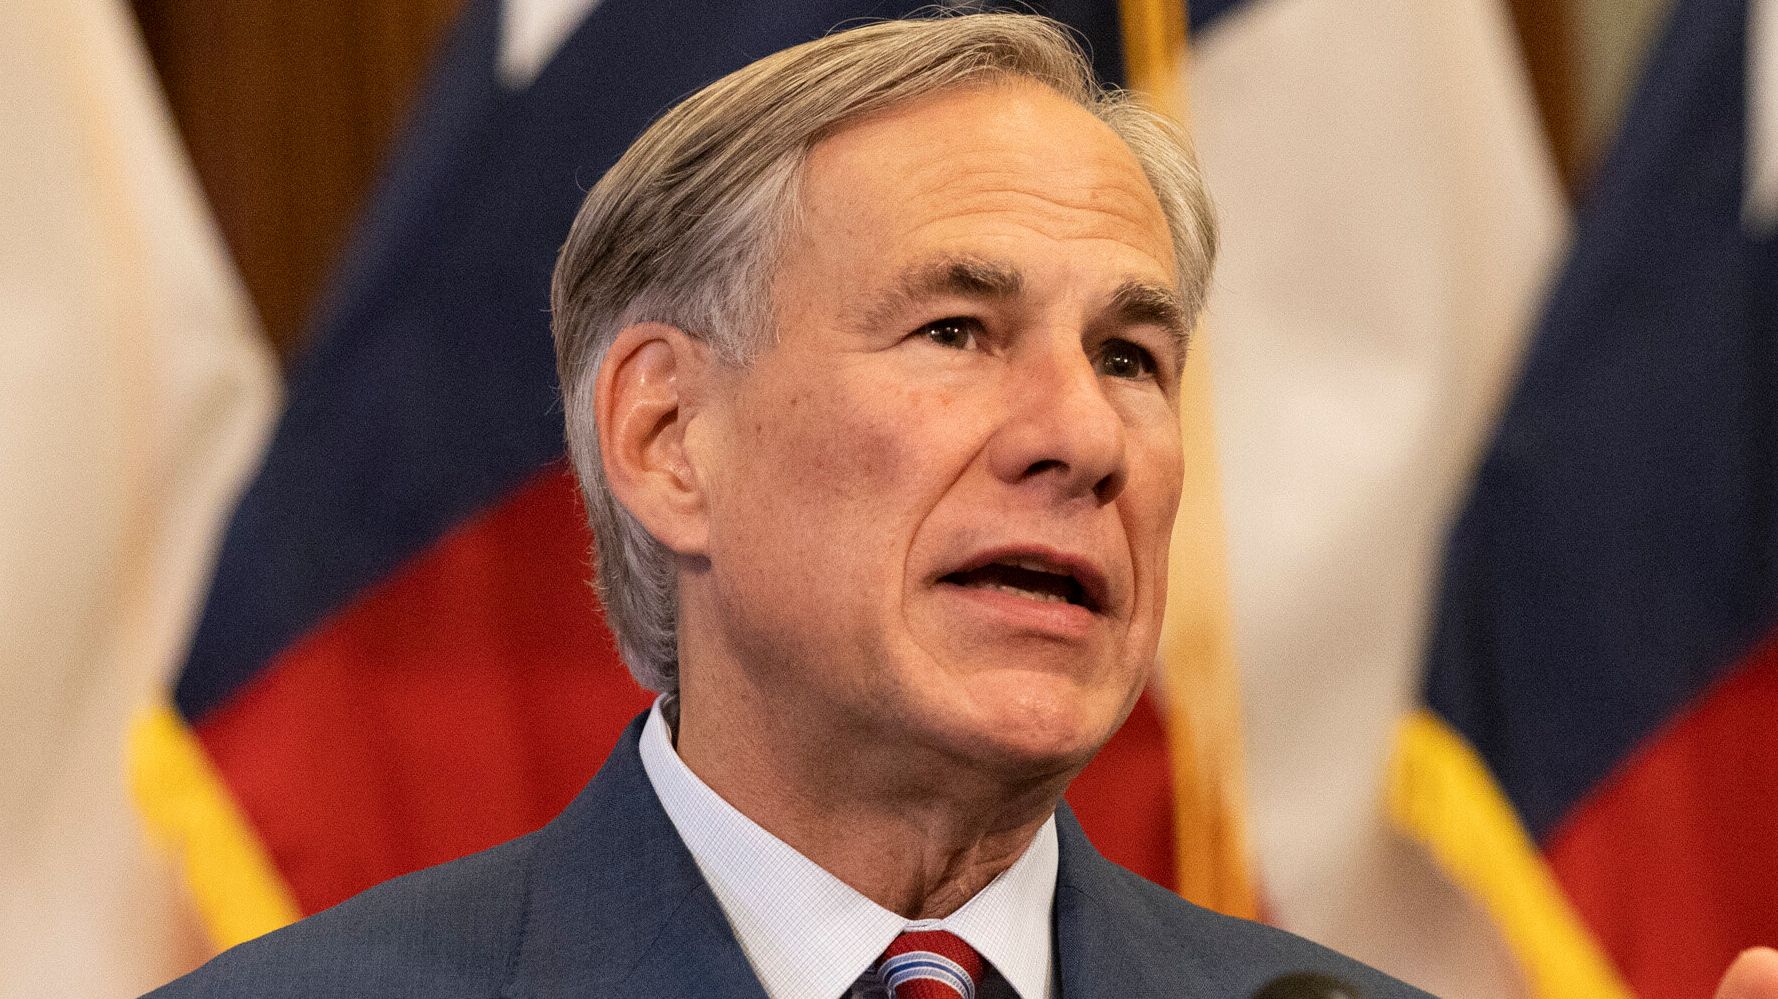 Texas Governor’s Big Coronavirus Boast Gets A Blunt Fact Check From The Experts